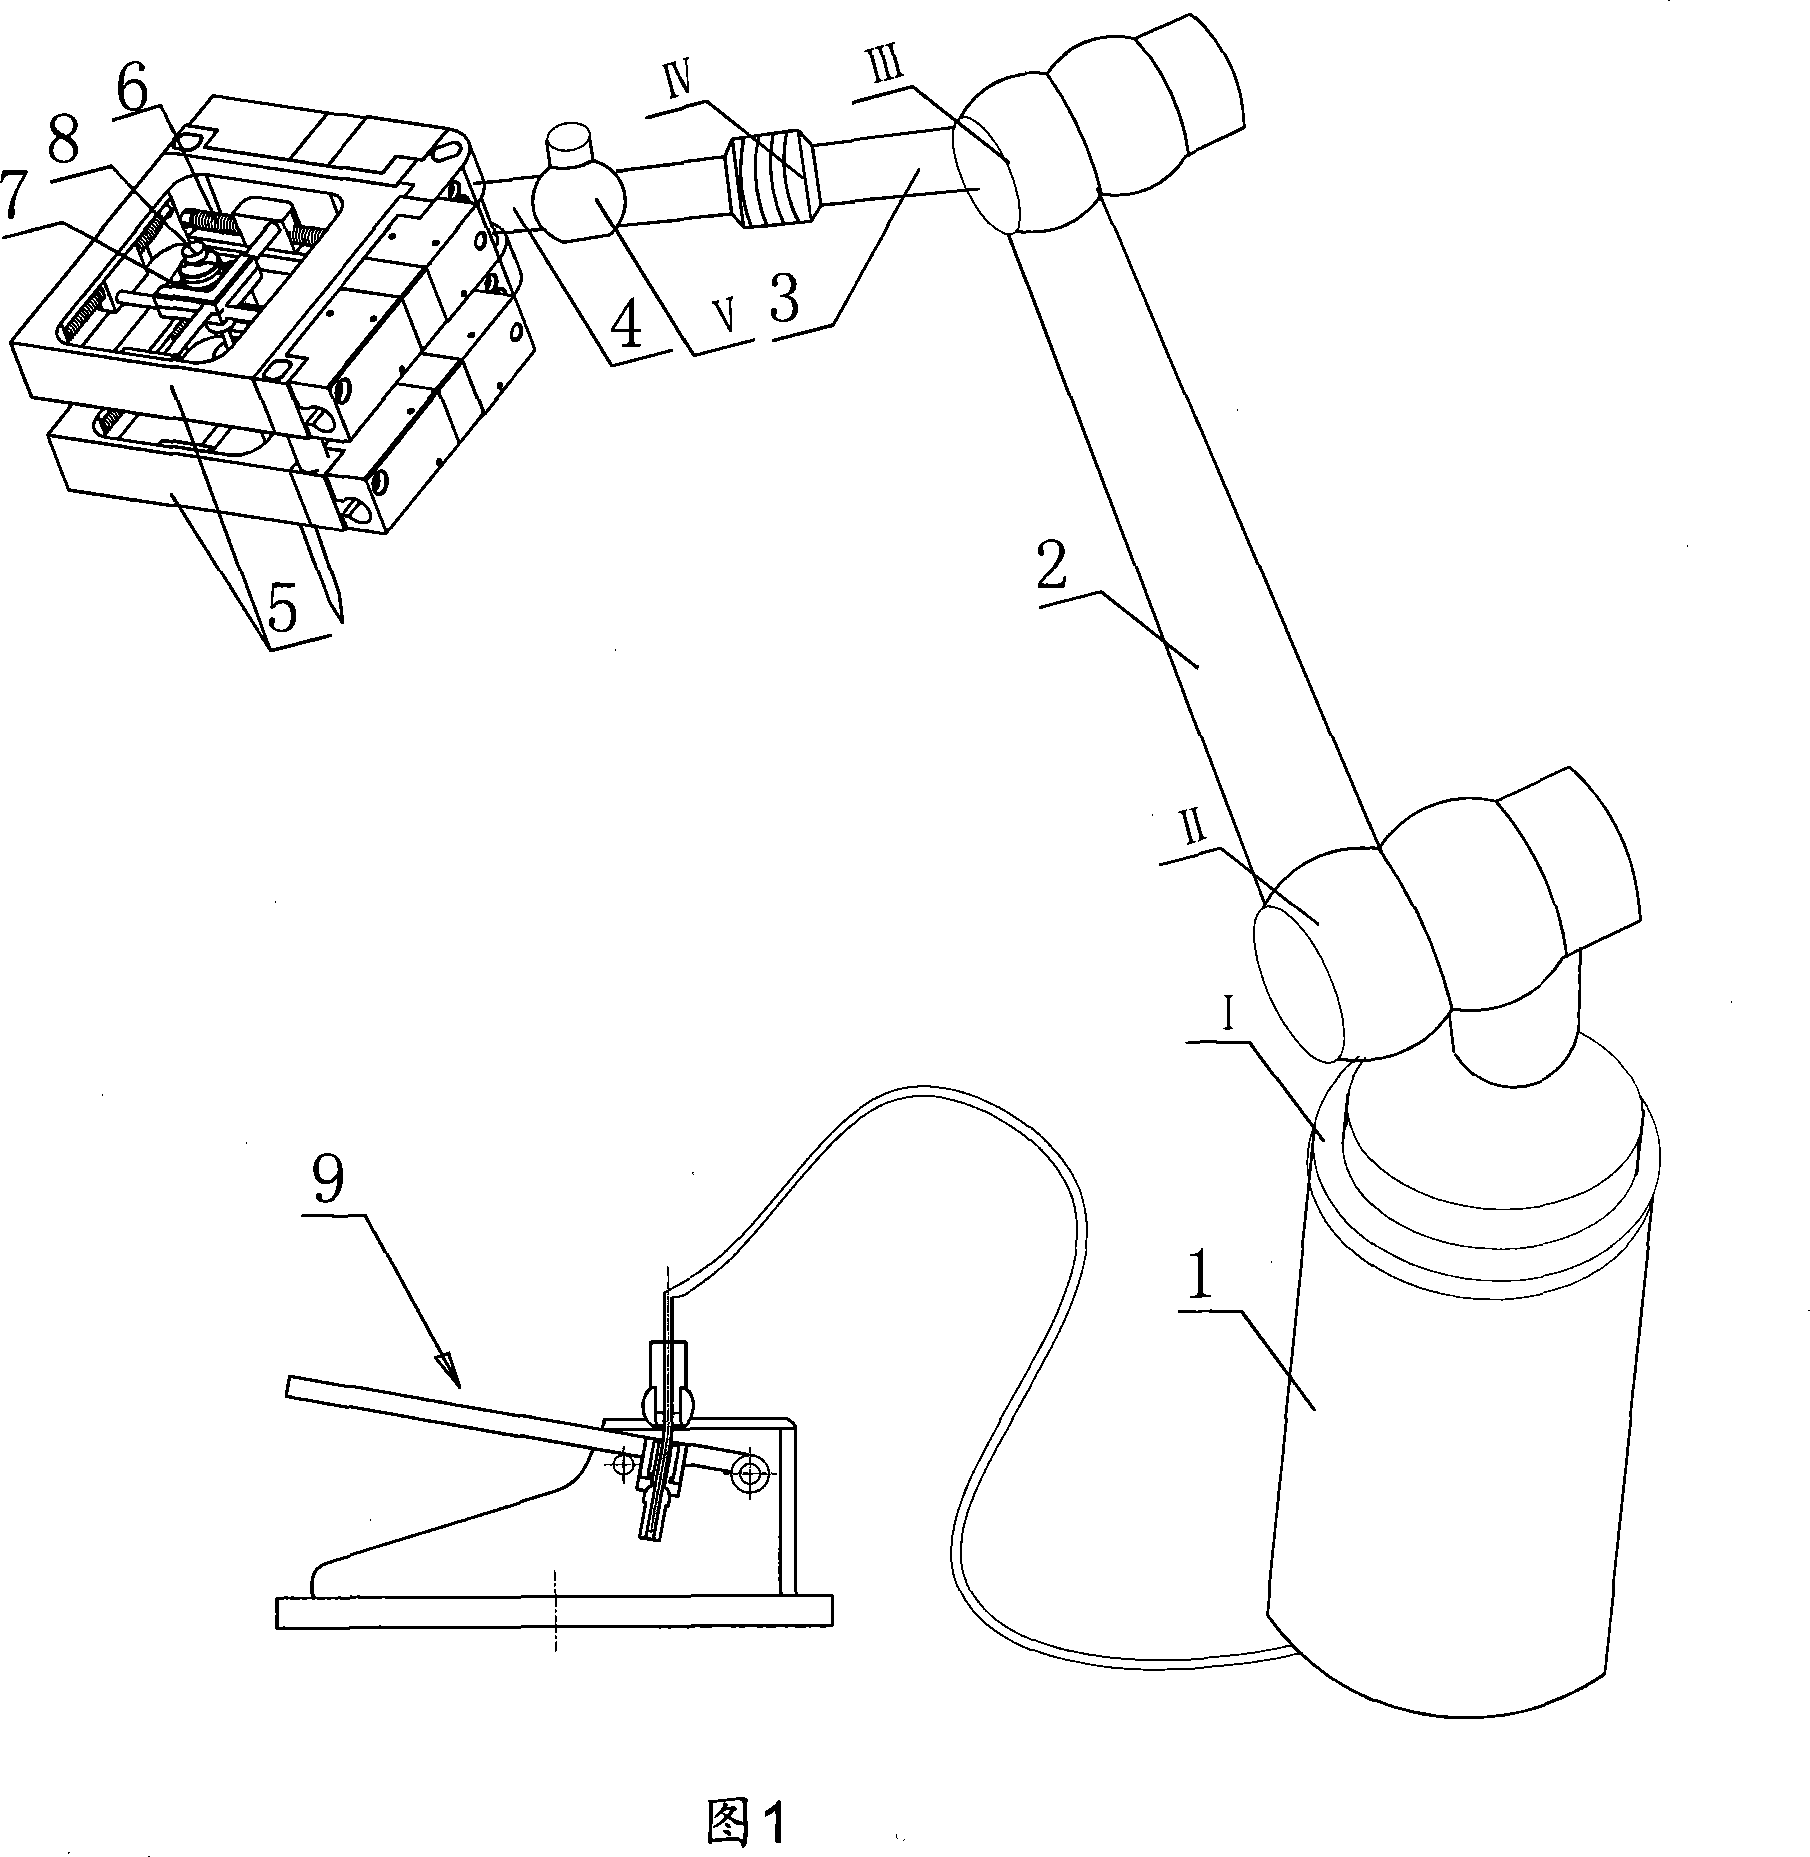 Active-passive mixed-connected robot with nine degrees of freedom